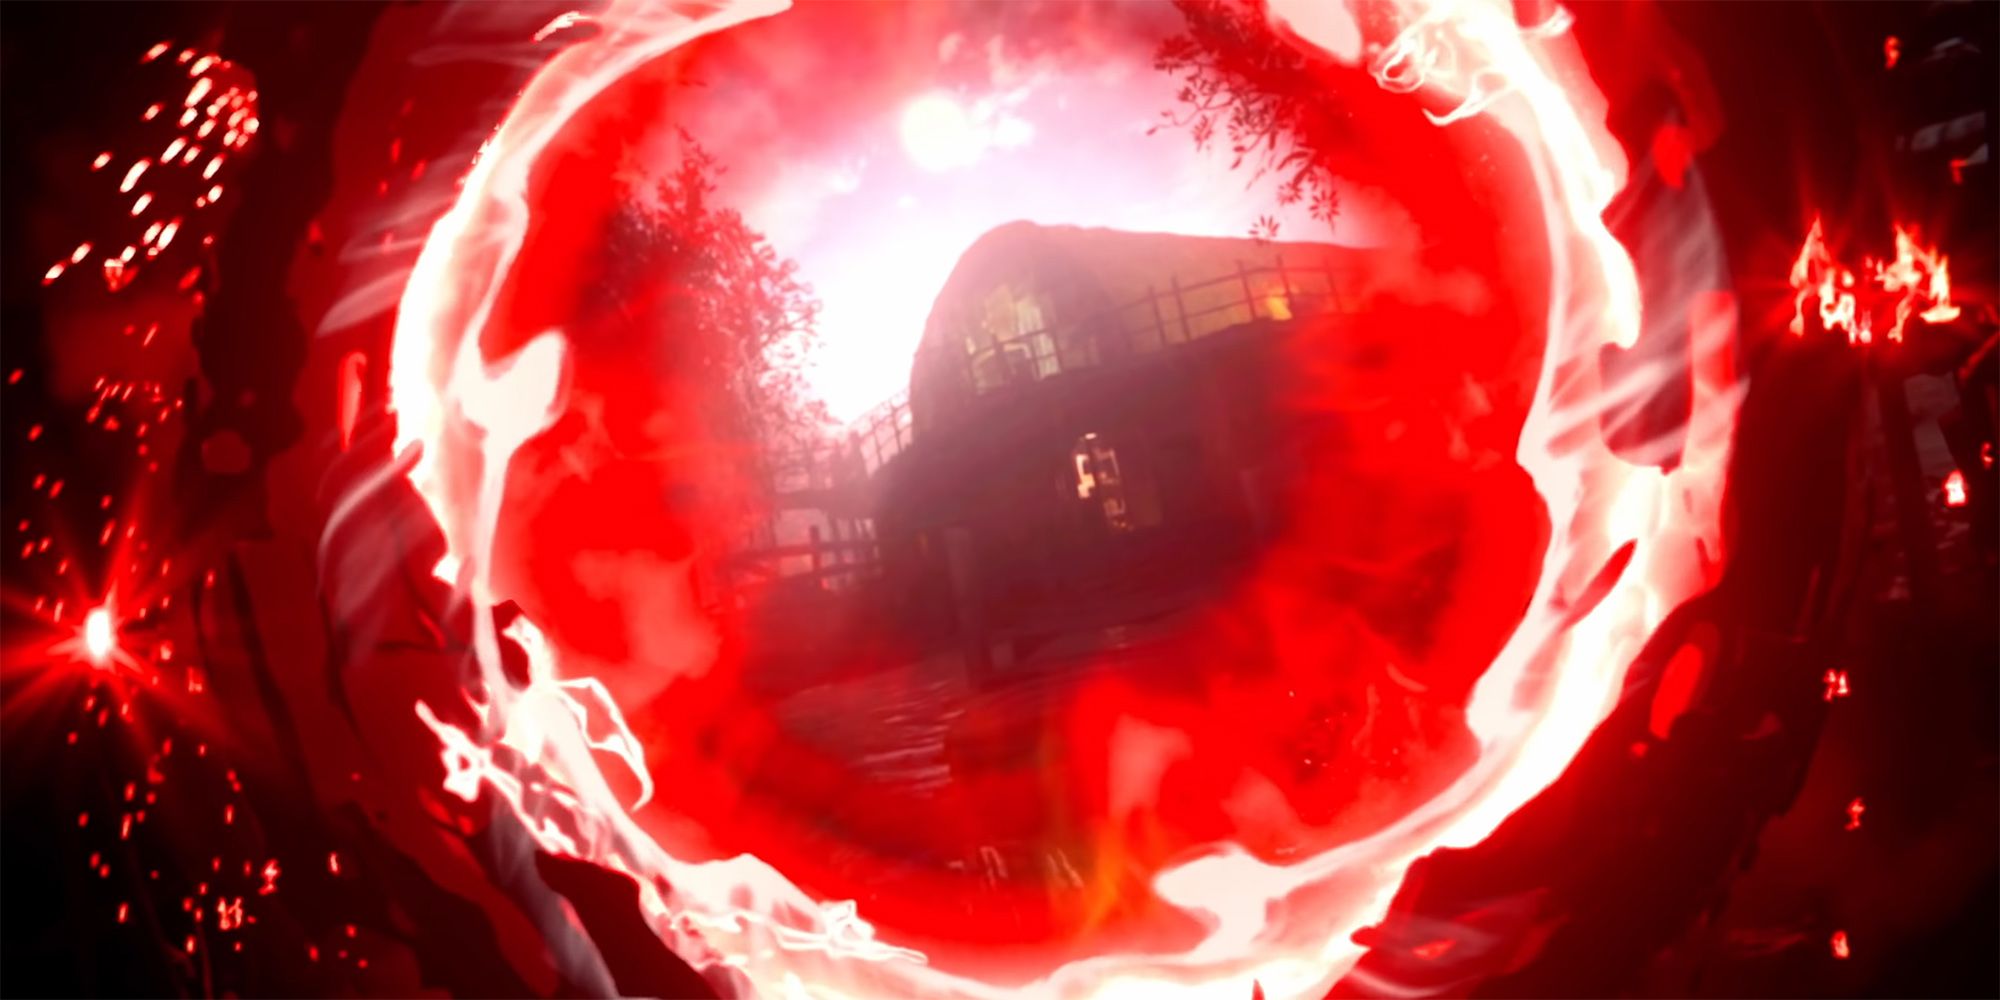 Call of Duty Vanguard Zombies - What The Portals Look Like Before You Hop In